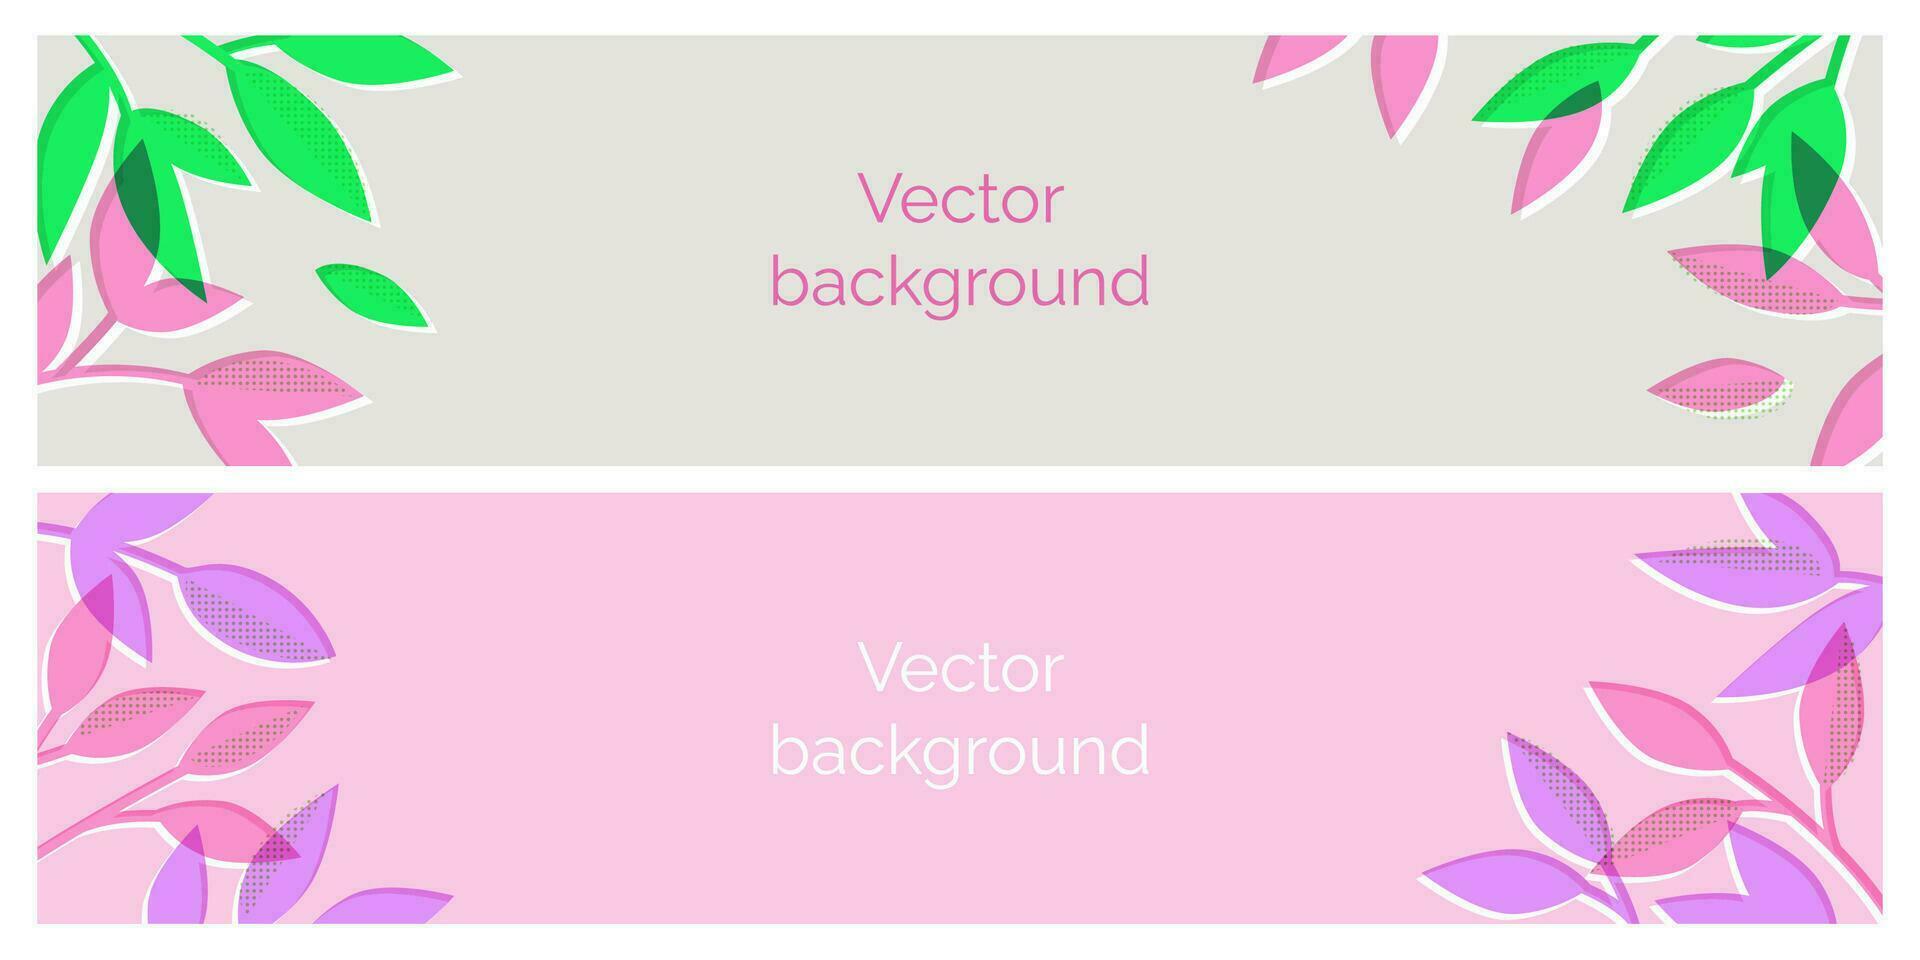 Decorative abstract horizontal banners with colorful leaves. vector